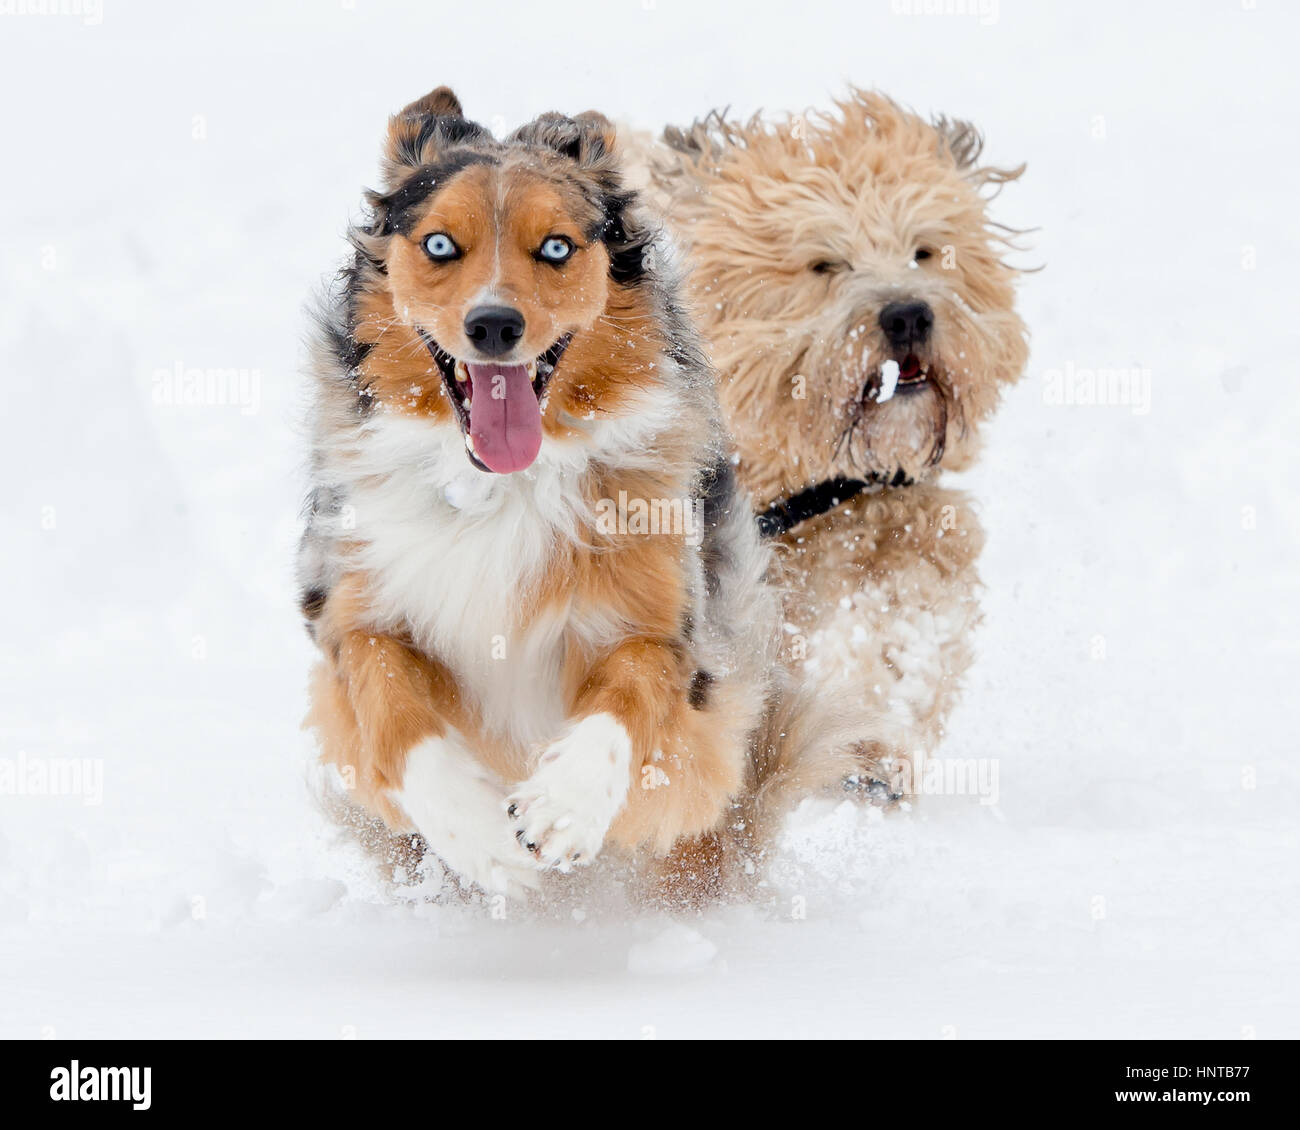 Beautiful happy healthy dogs running playing leaping frolicking in the snow.  Action winter athletic.  Blue eyed Australian Shepherd Stock Photo